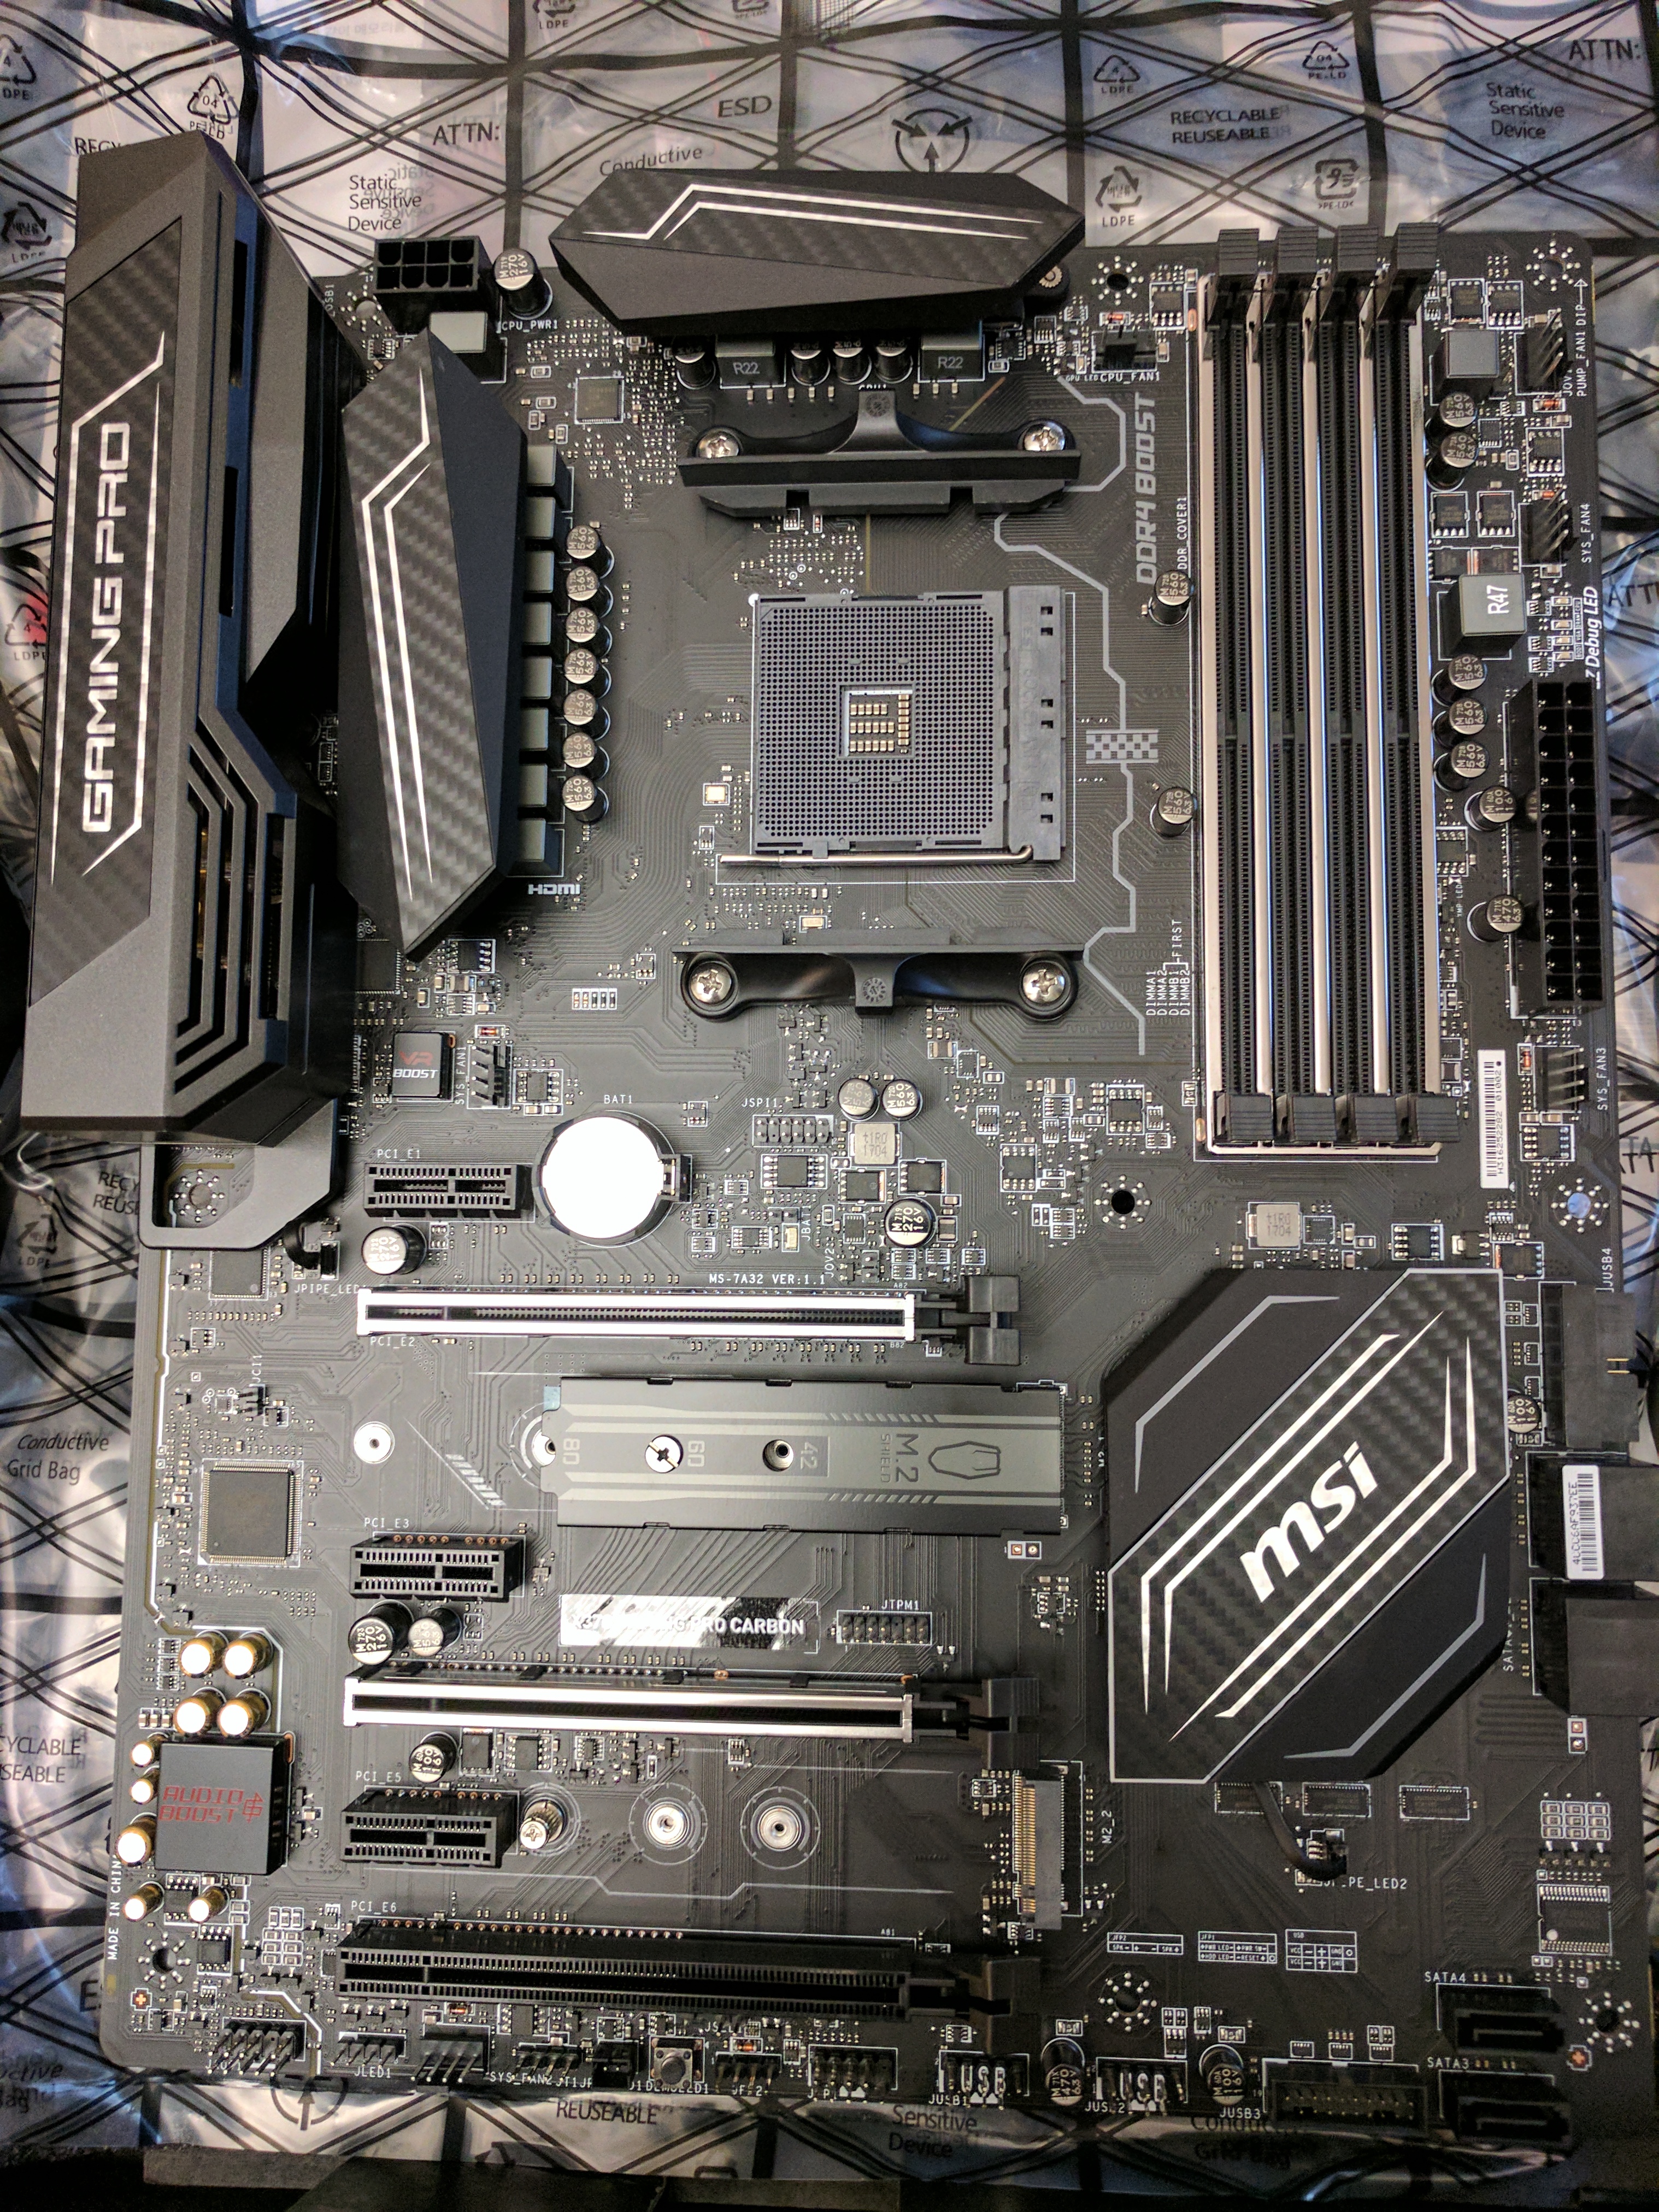 The new MSI motherboard, complete with built-in M.2 SSD slots